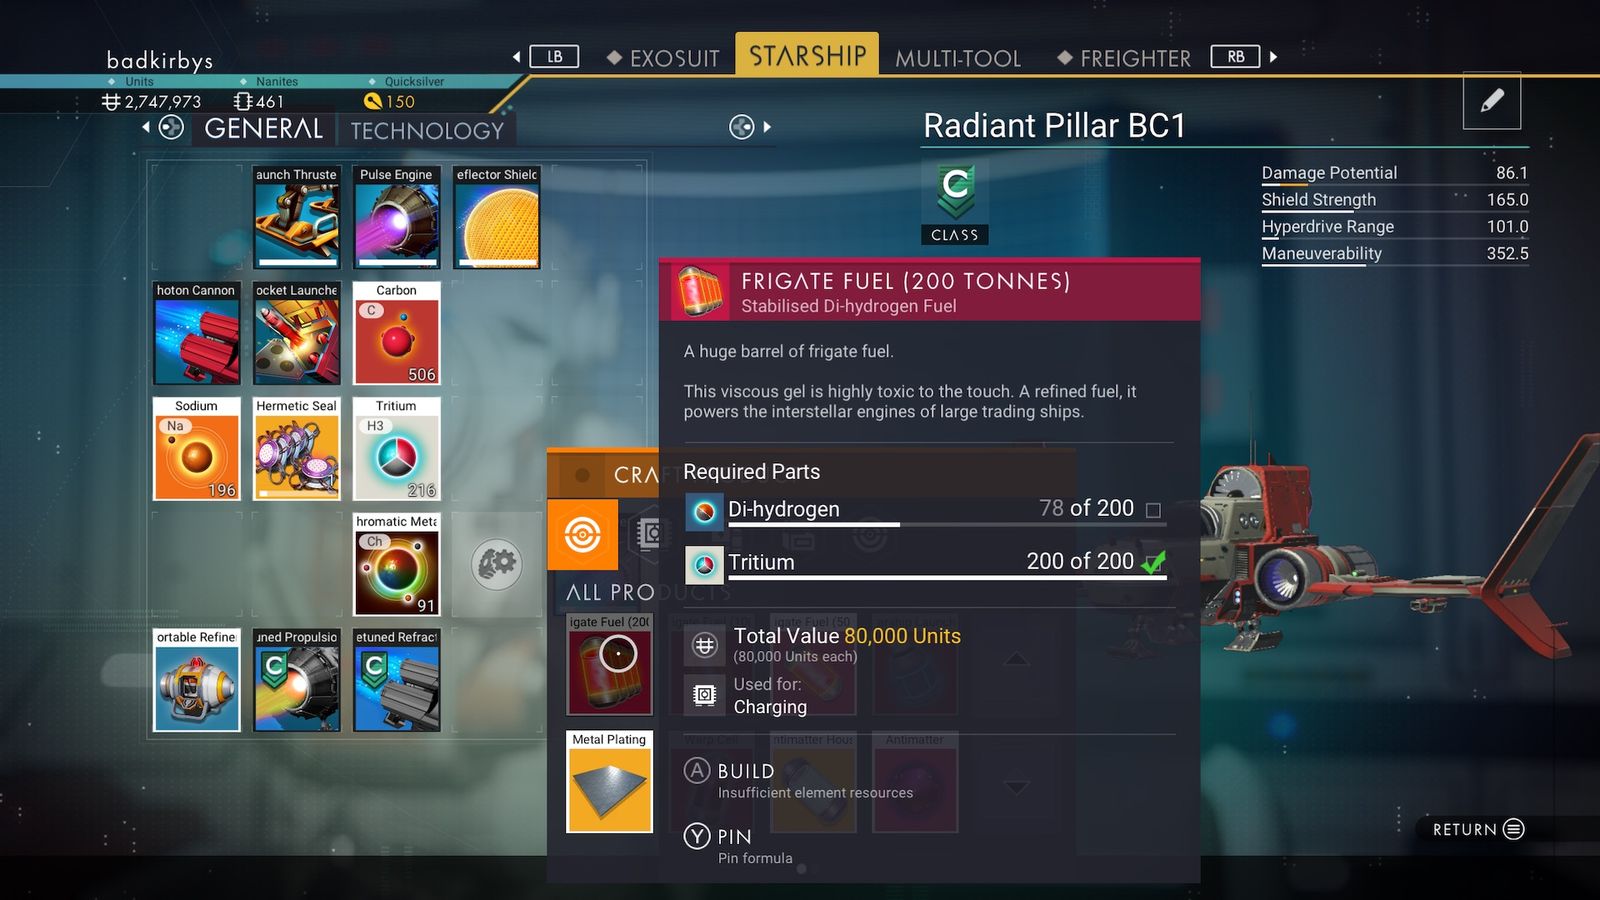 The recipe for 200 tonnes of Frigate Fuel, using Di-hydrogen and Tritium, is shown in the crafting area of the player inventory in No Man's Sky.